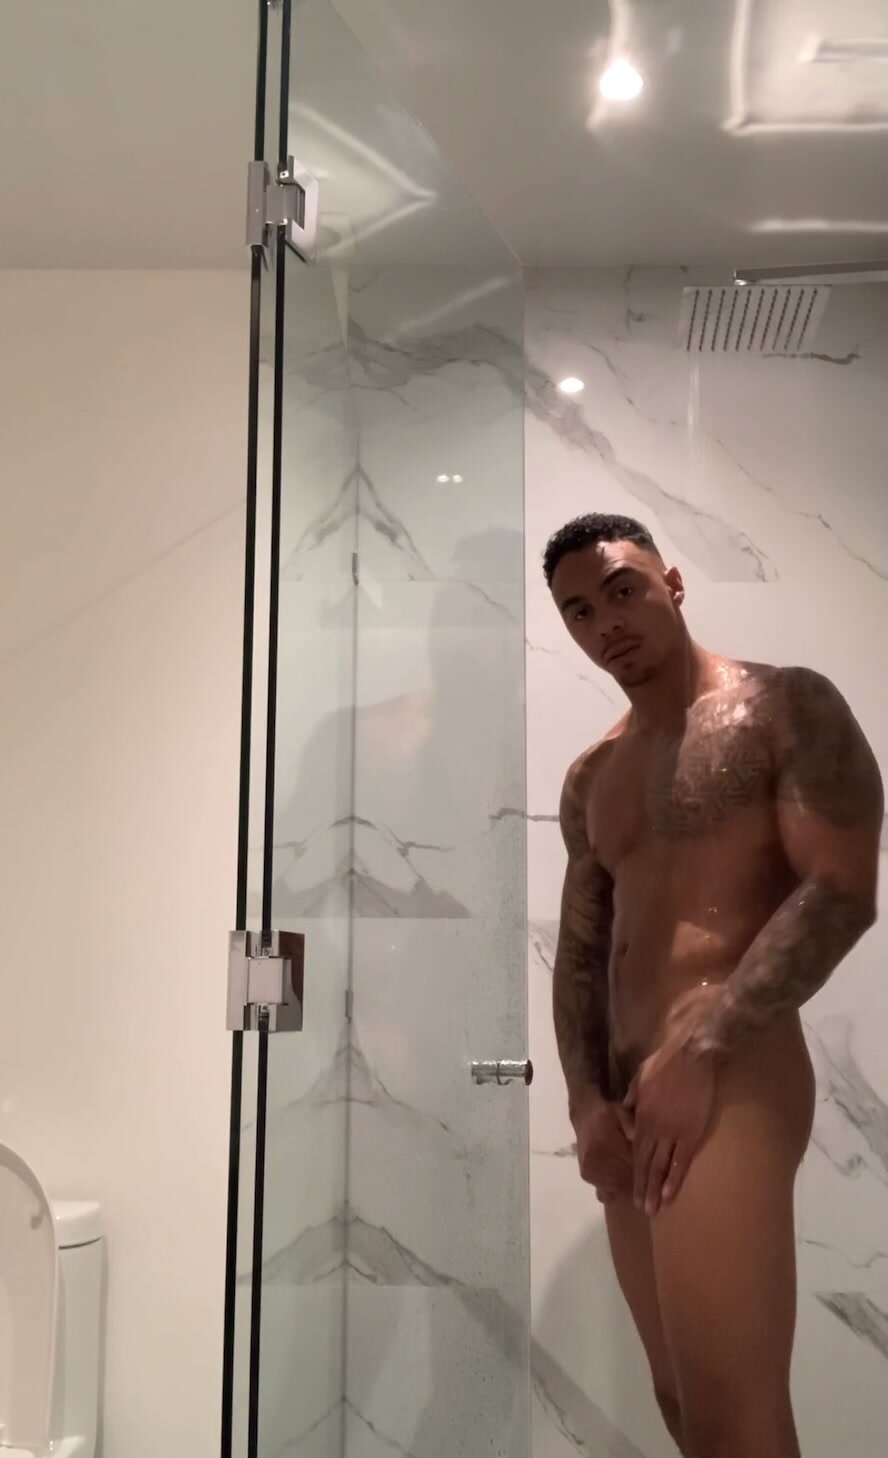 Hot guy in the shower - video 10